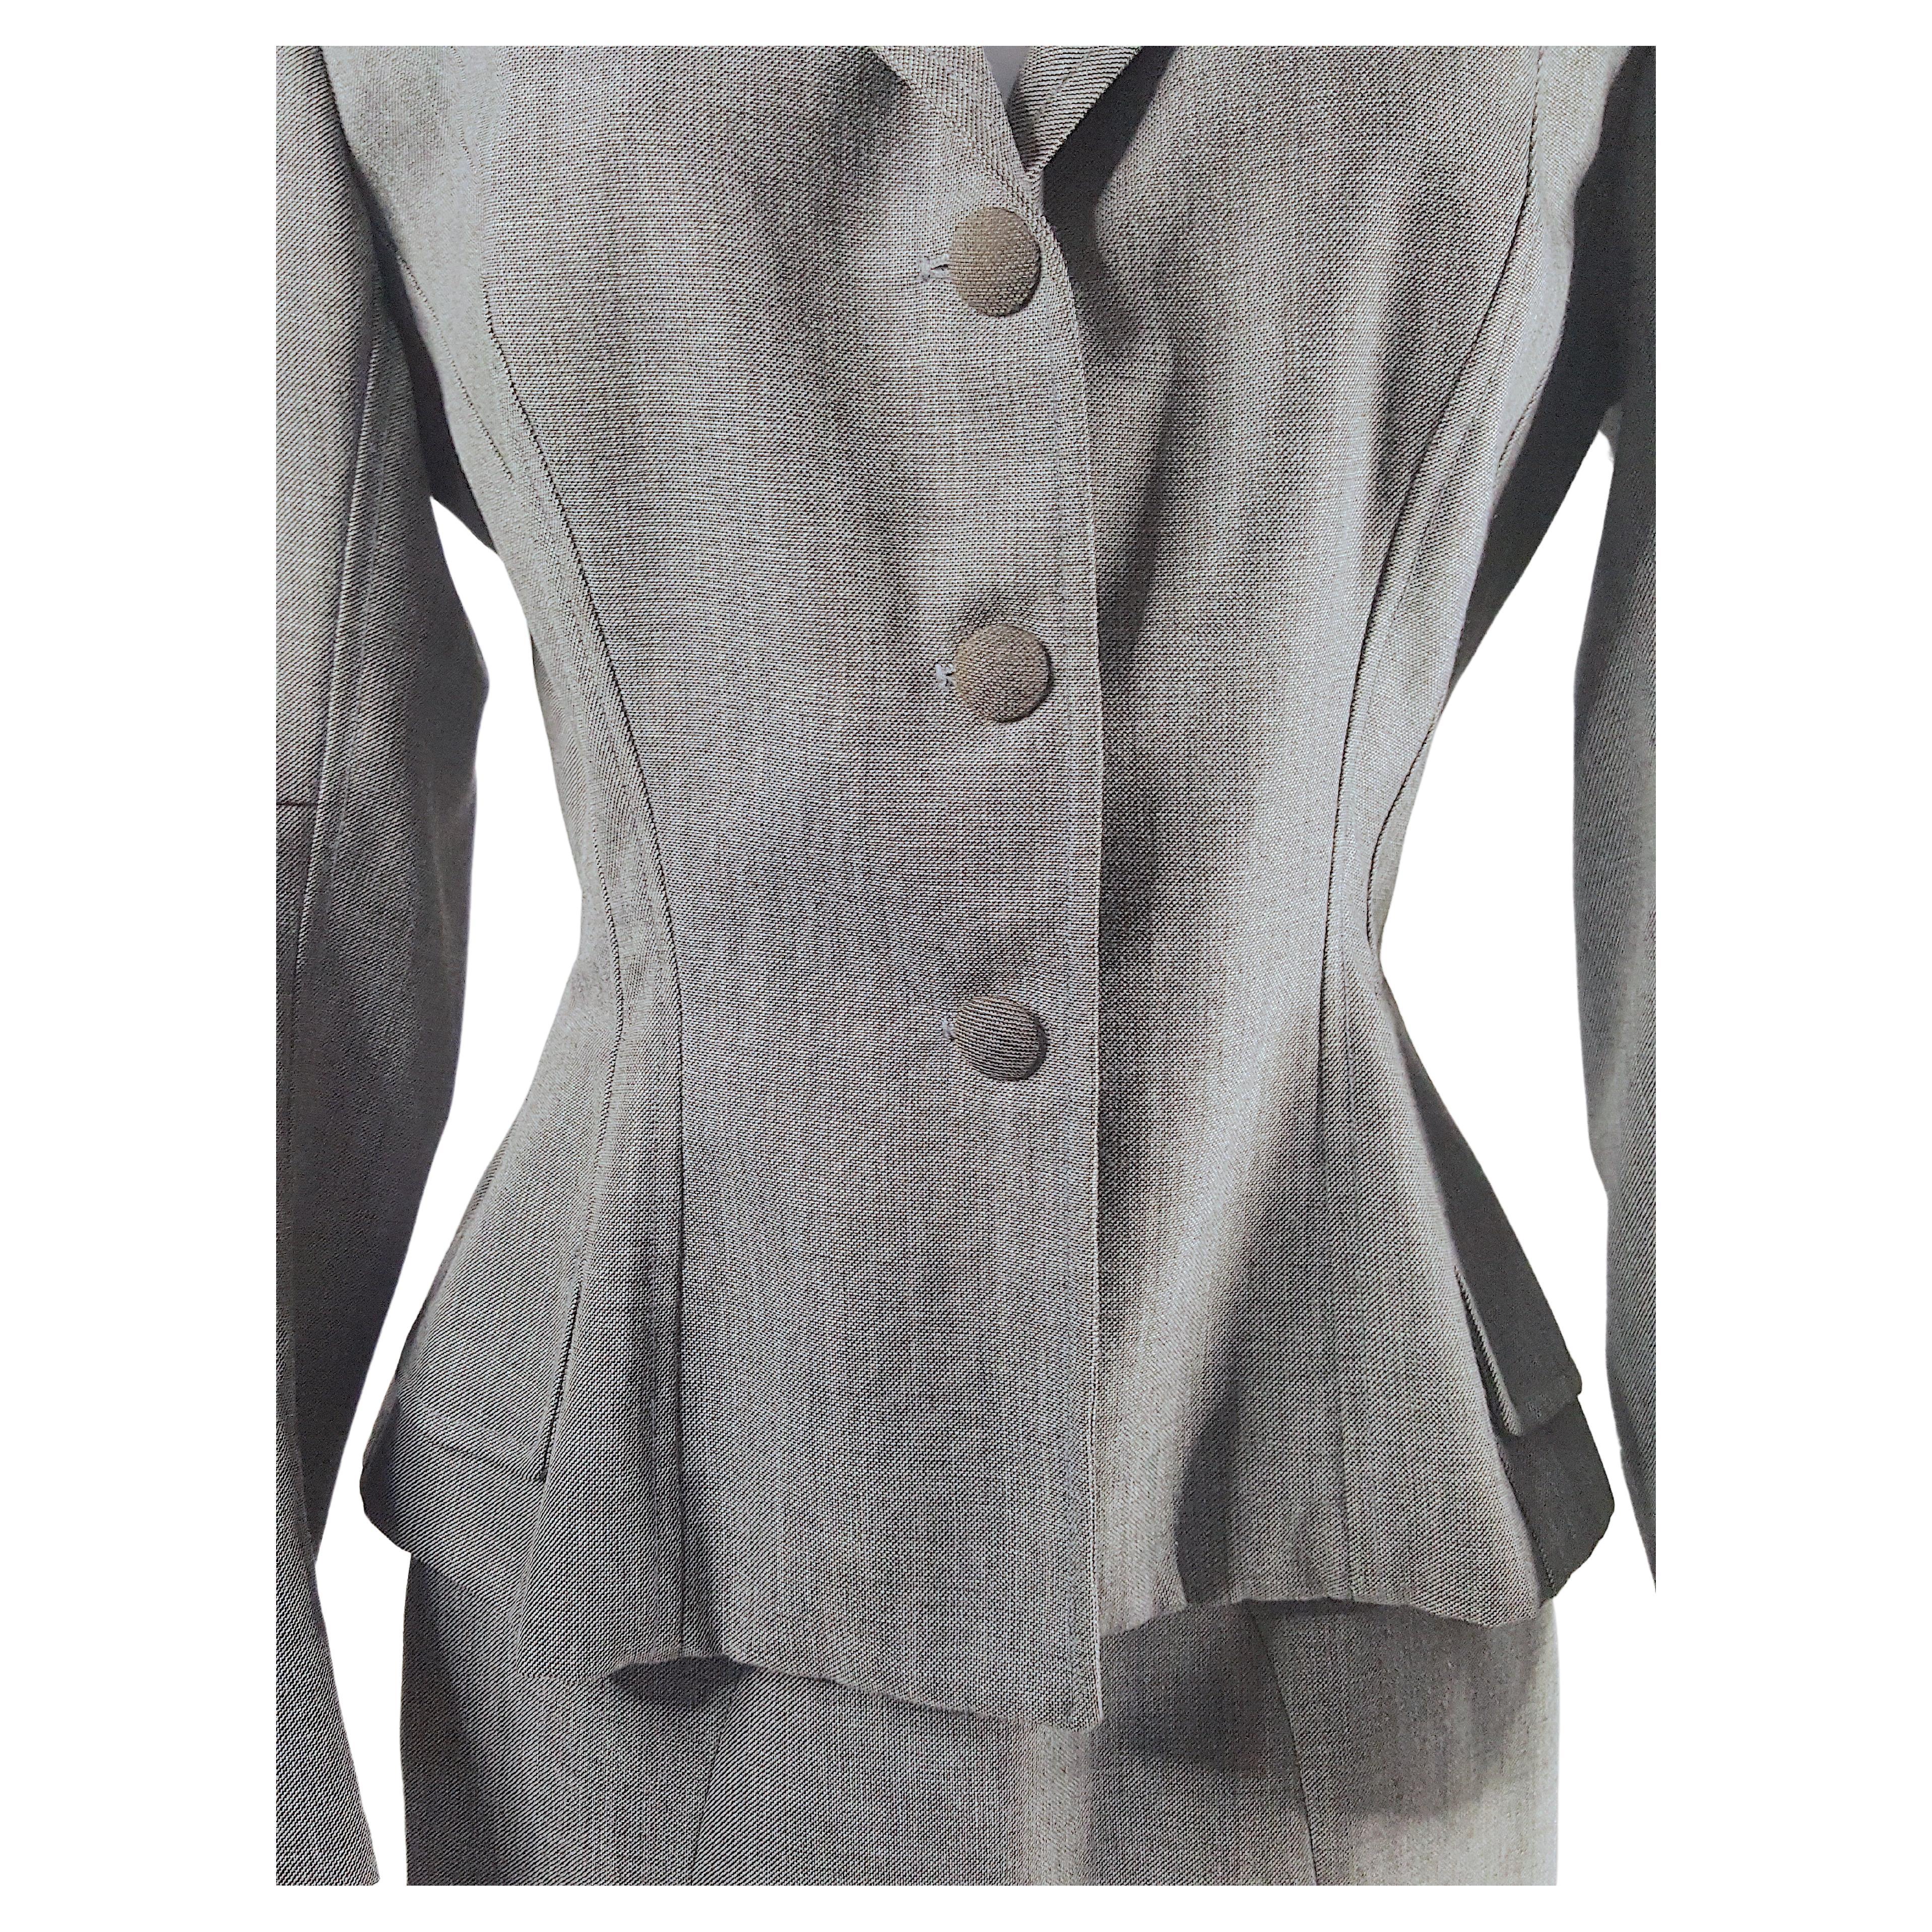 As French couture made by Martin Grant at his Paris atelier in the Marais in the mid-1990s, this pale grey plaid lightweight-wool slit-skirt suit has many hand-tailored elements like a Christian-Dior original from 1947 that create a curvaceous